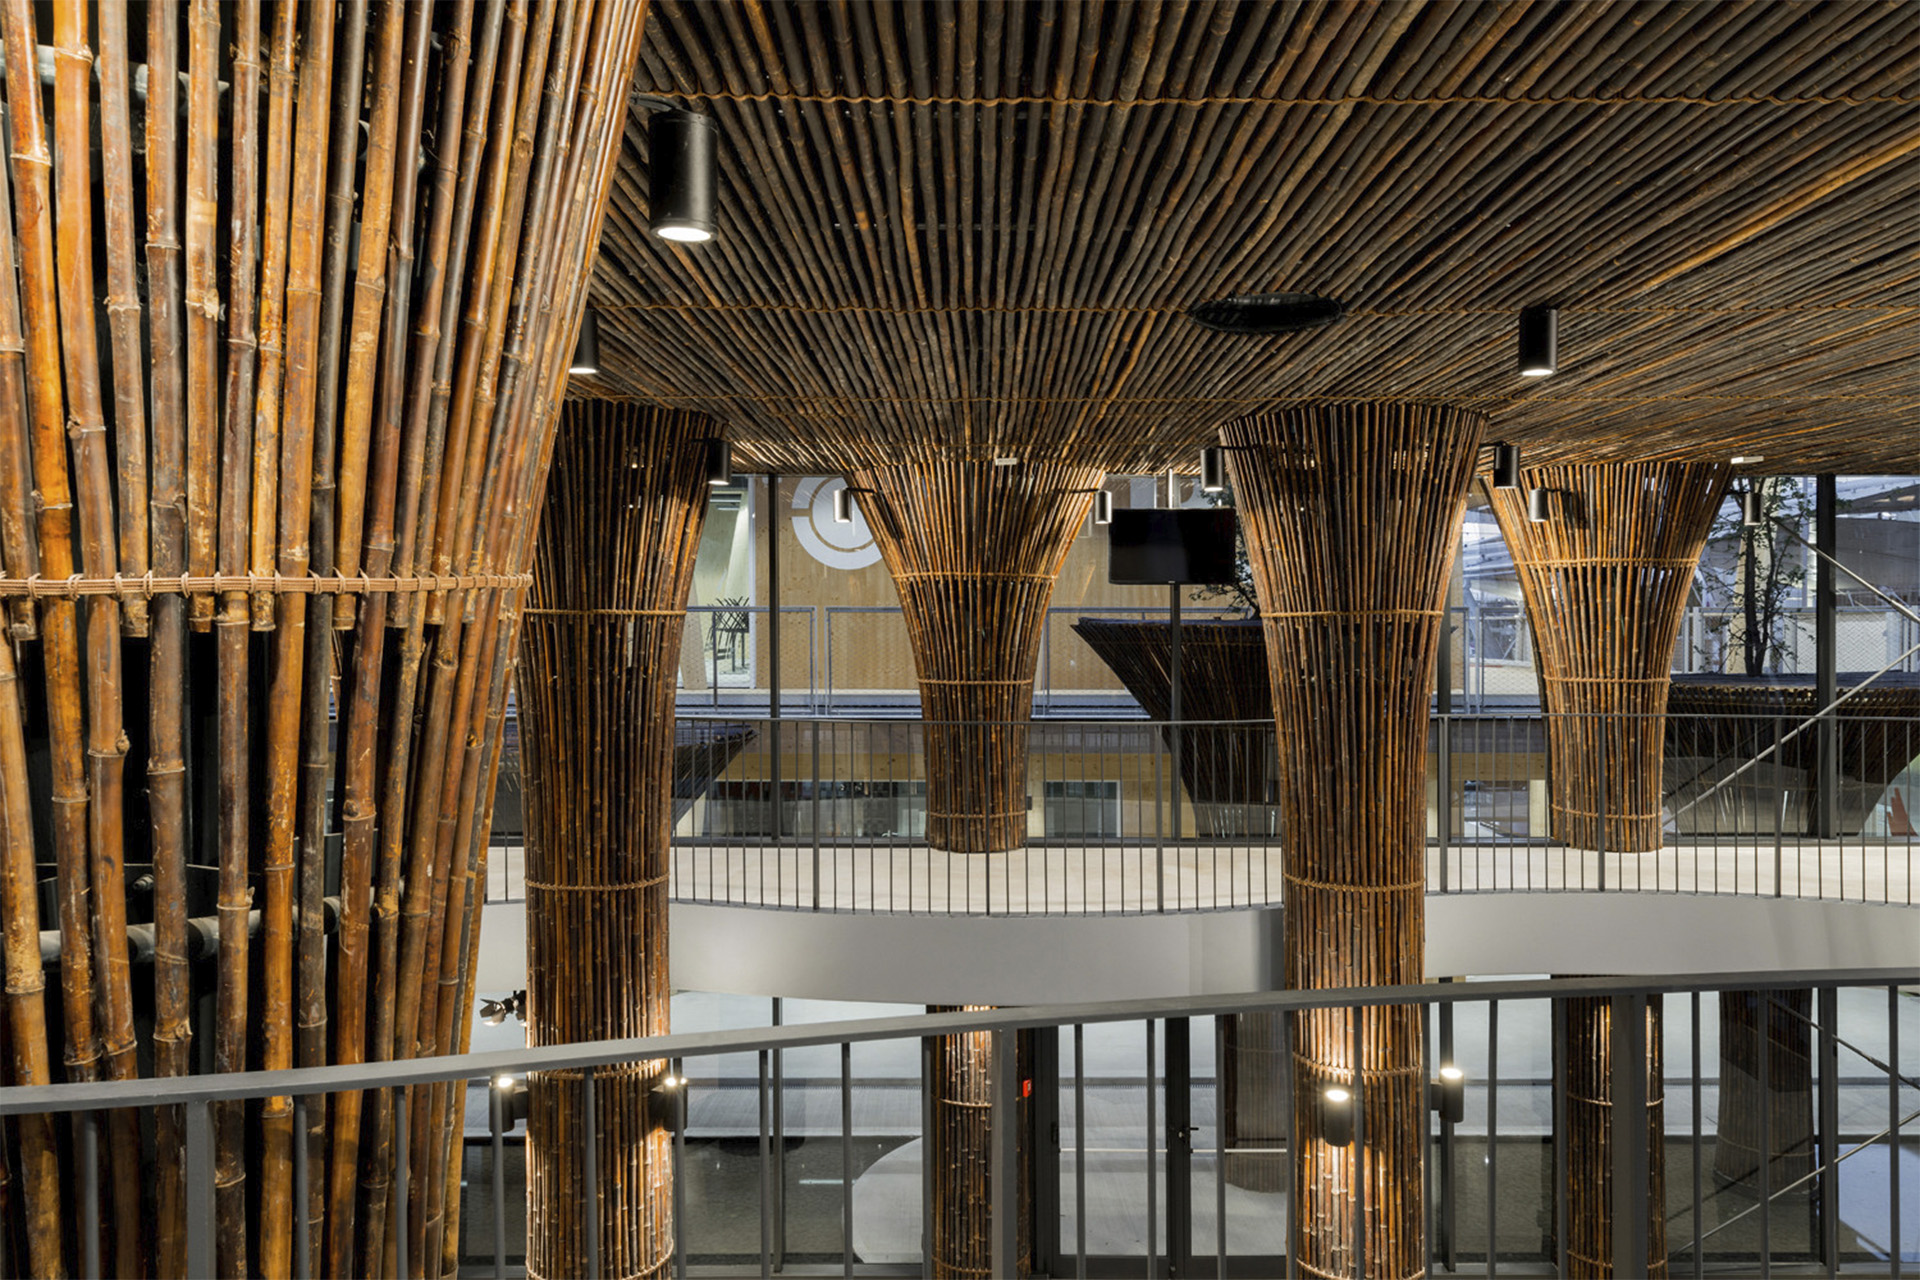 Use of bamboo in interior architecture